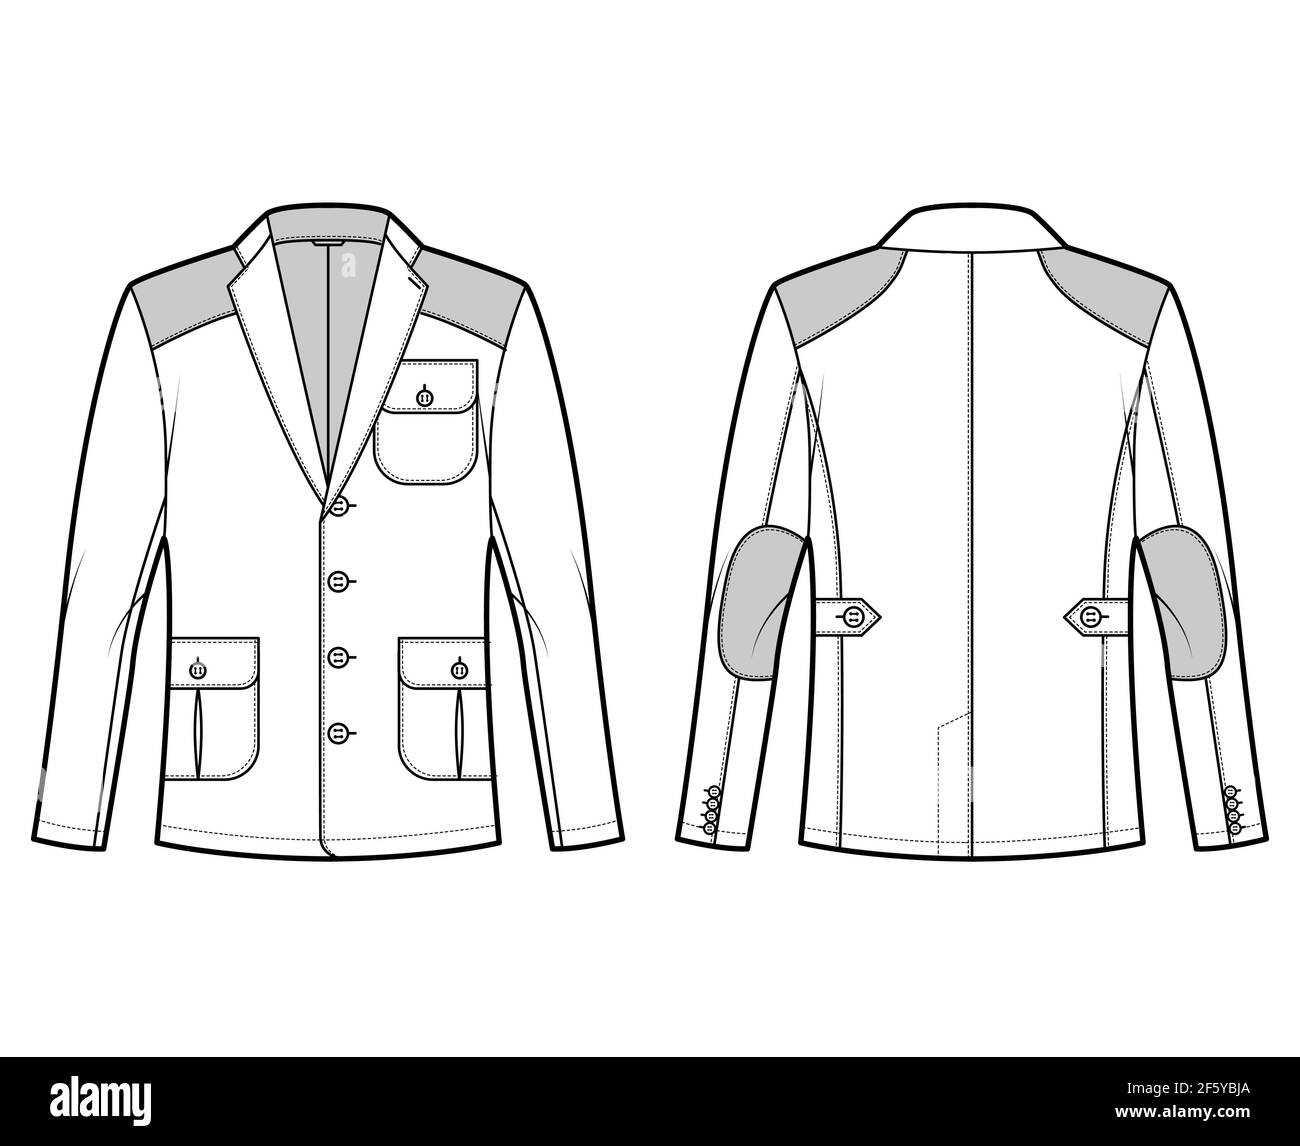 Hunting Shooting jacket technical fashion illustration with notched collar, flap pockets, Trim, Shoulder Elbow Patch. Flat coat template front, back, white, grey color. Women, unisex Blazer CAD mockup Stock Vector